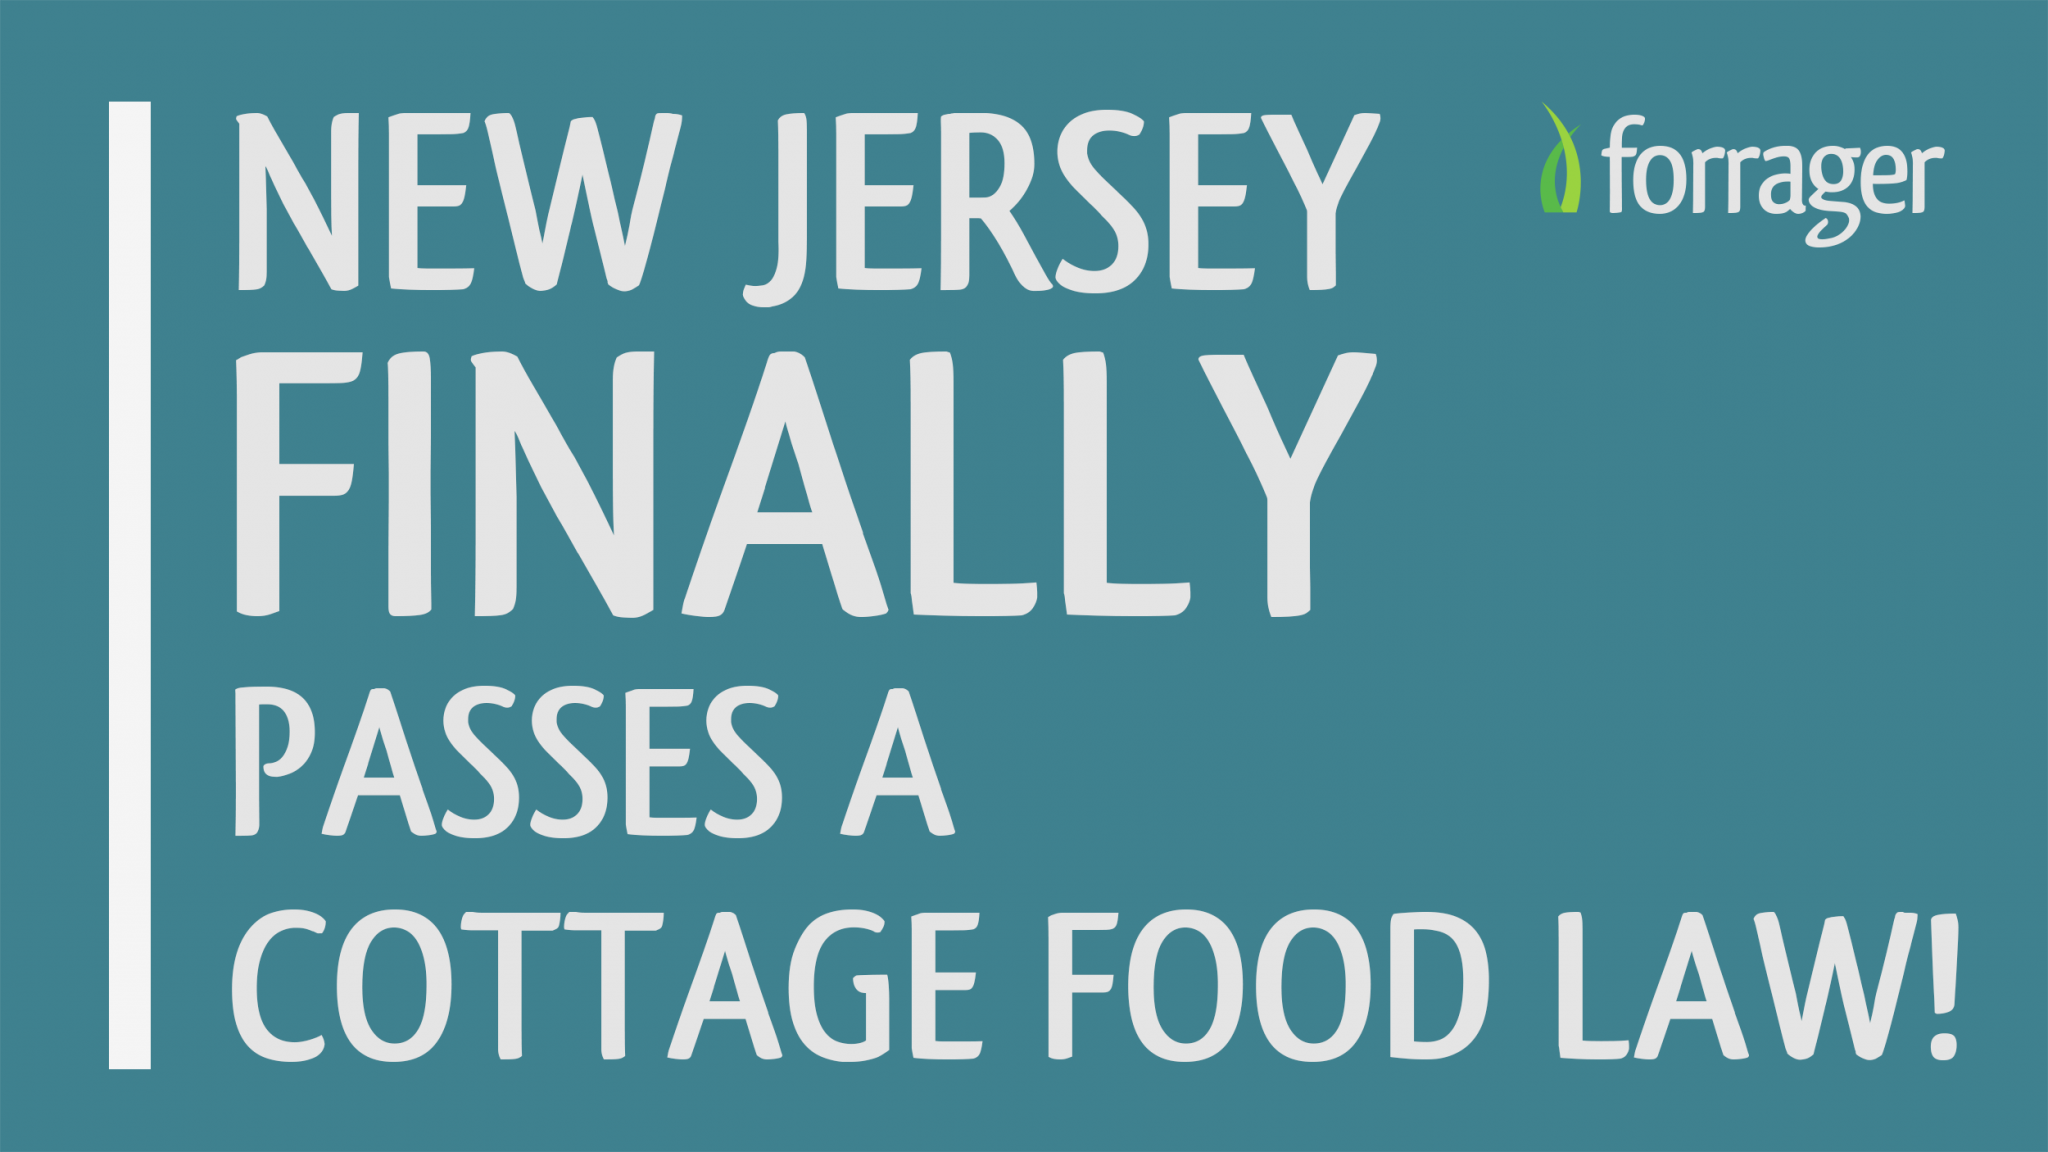 New Jersey Finally Passes A Cottage Food Law! Forrager